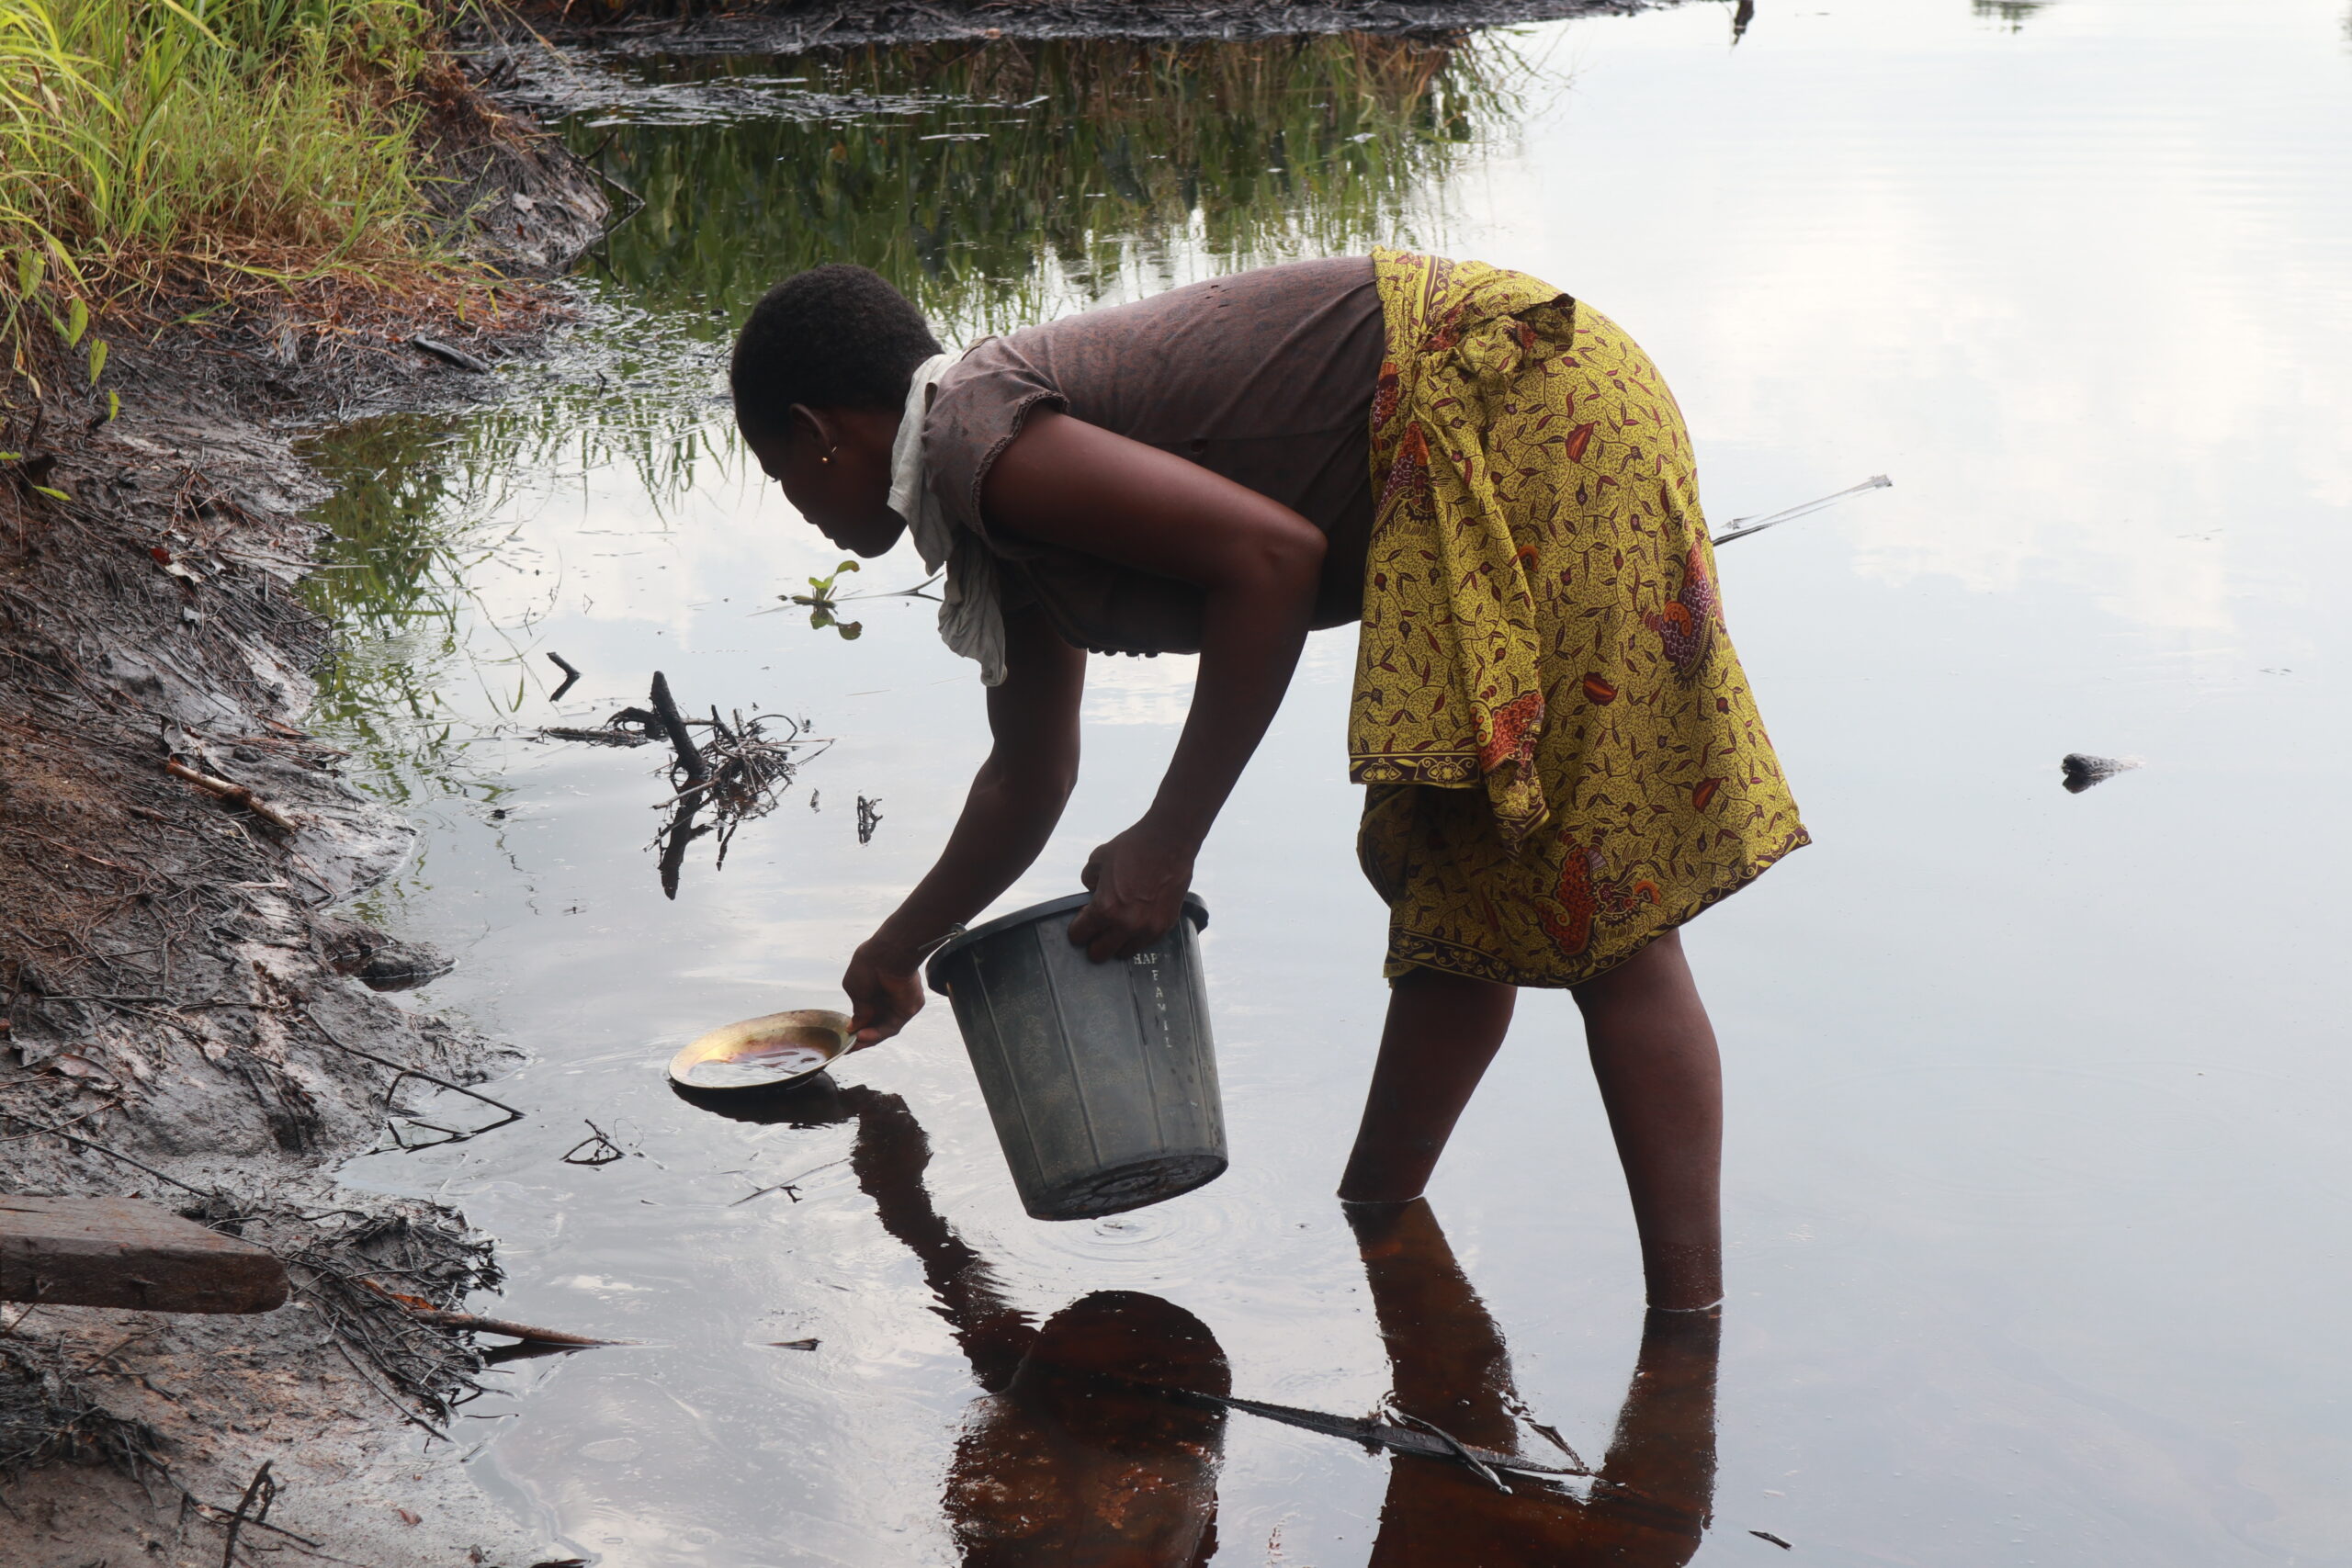 Community member in Omoviri attempting cleanup by manually scooping crude oil from the surface of the water